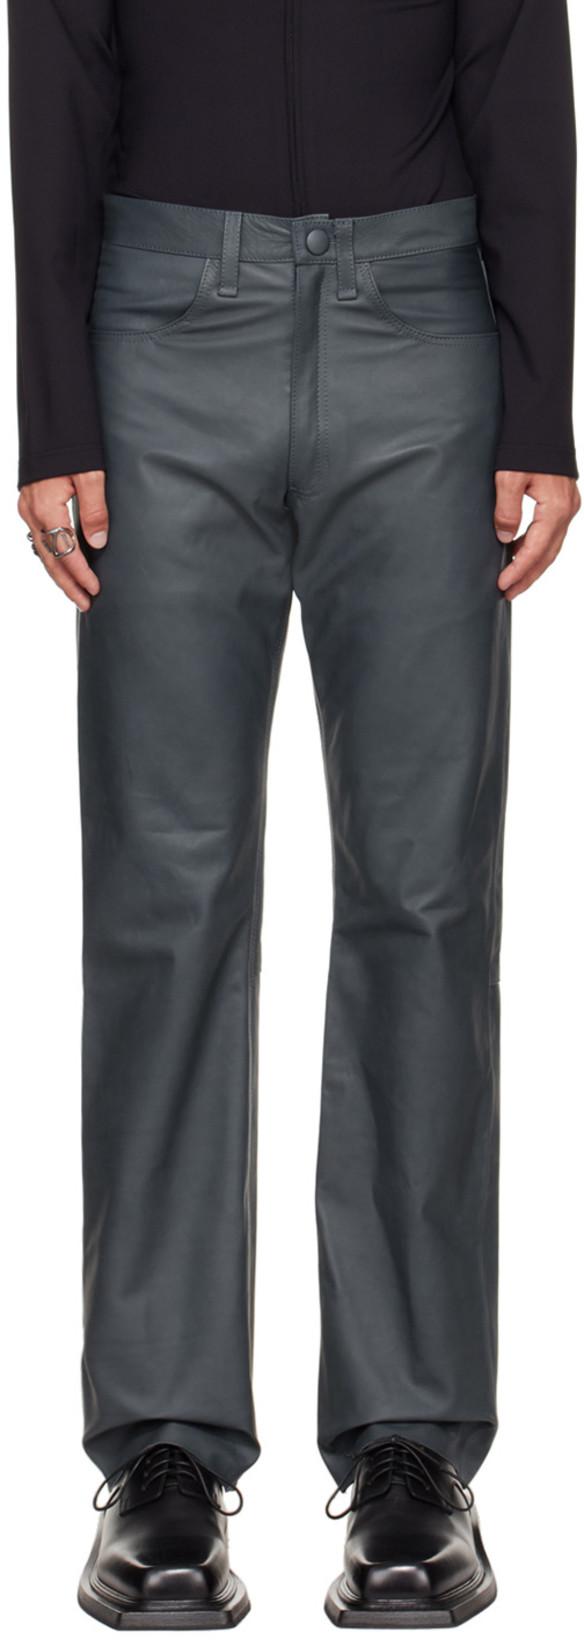 SSENSE Exclusive Gray Loose Leather Pants by AARON ESH